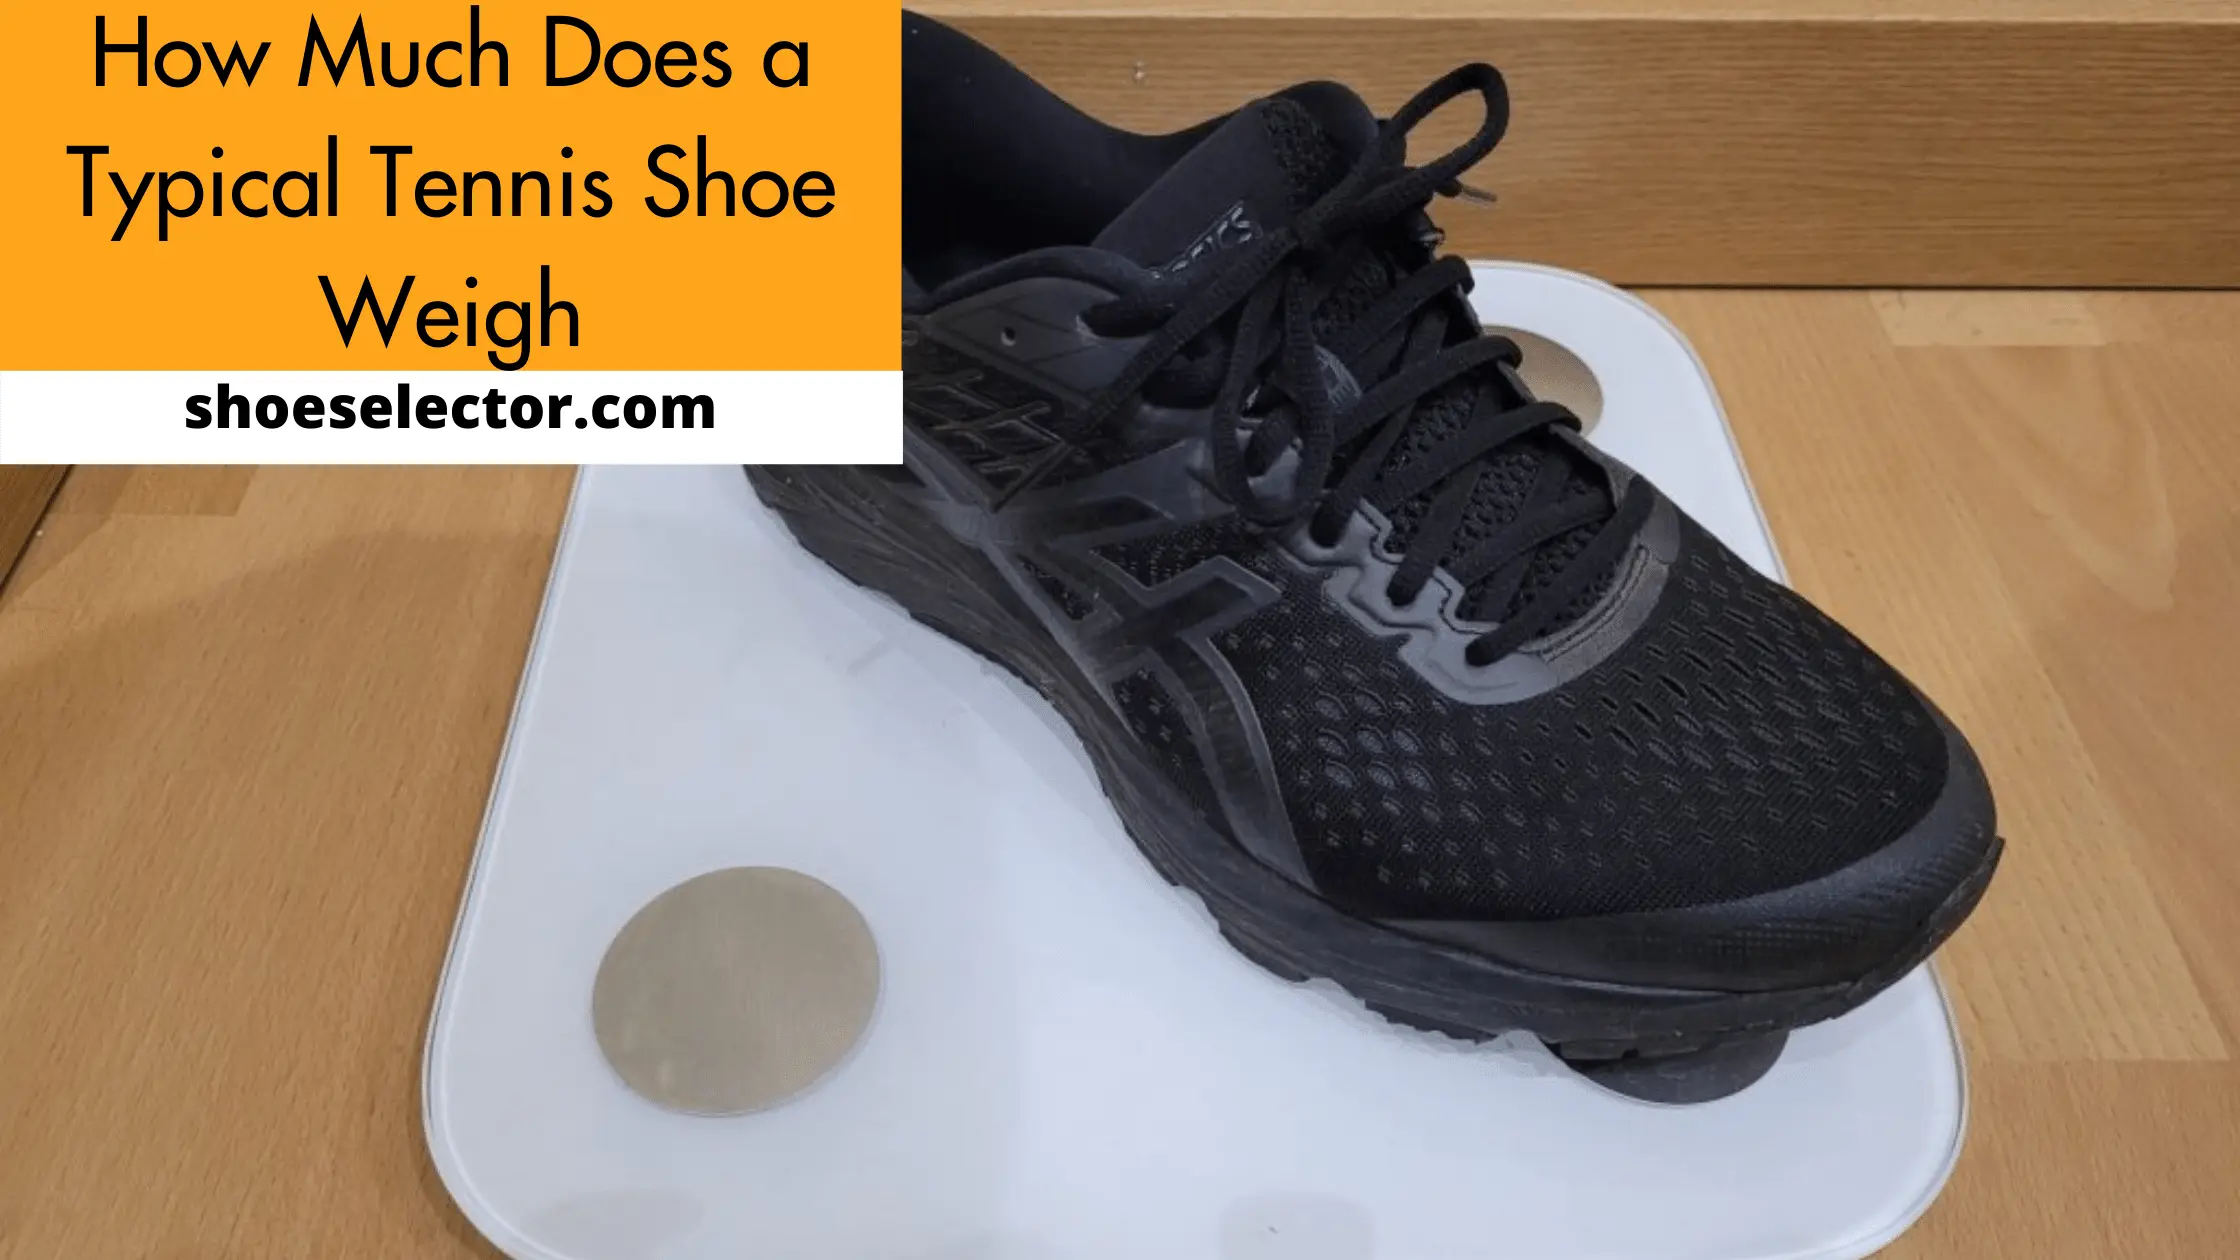 How Much Does a Typical Tennis Shoe Weigh? 